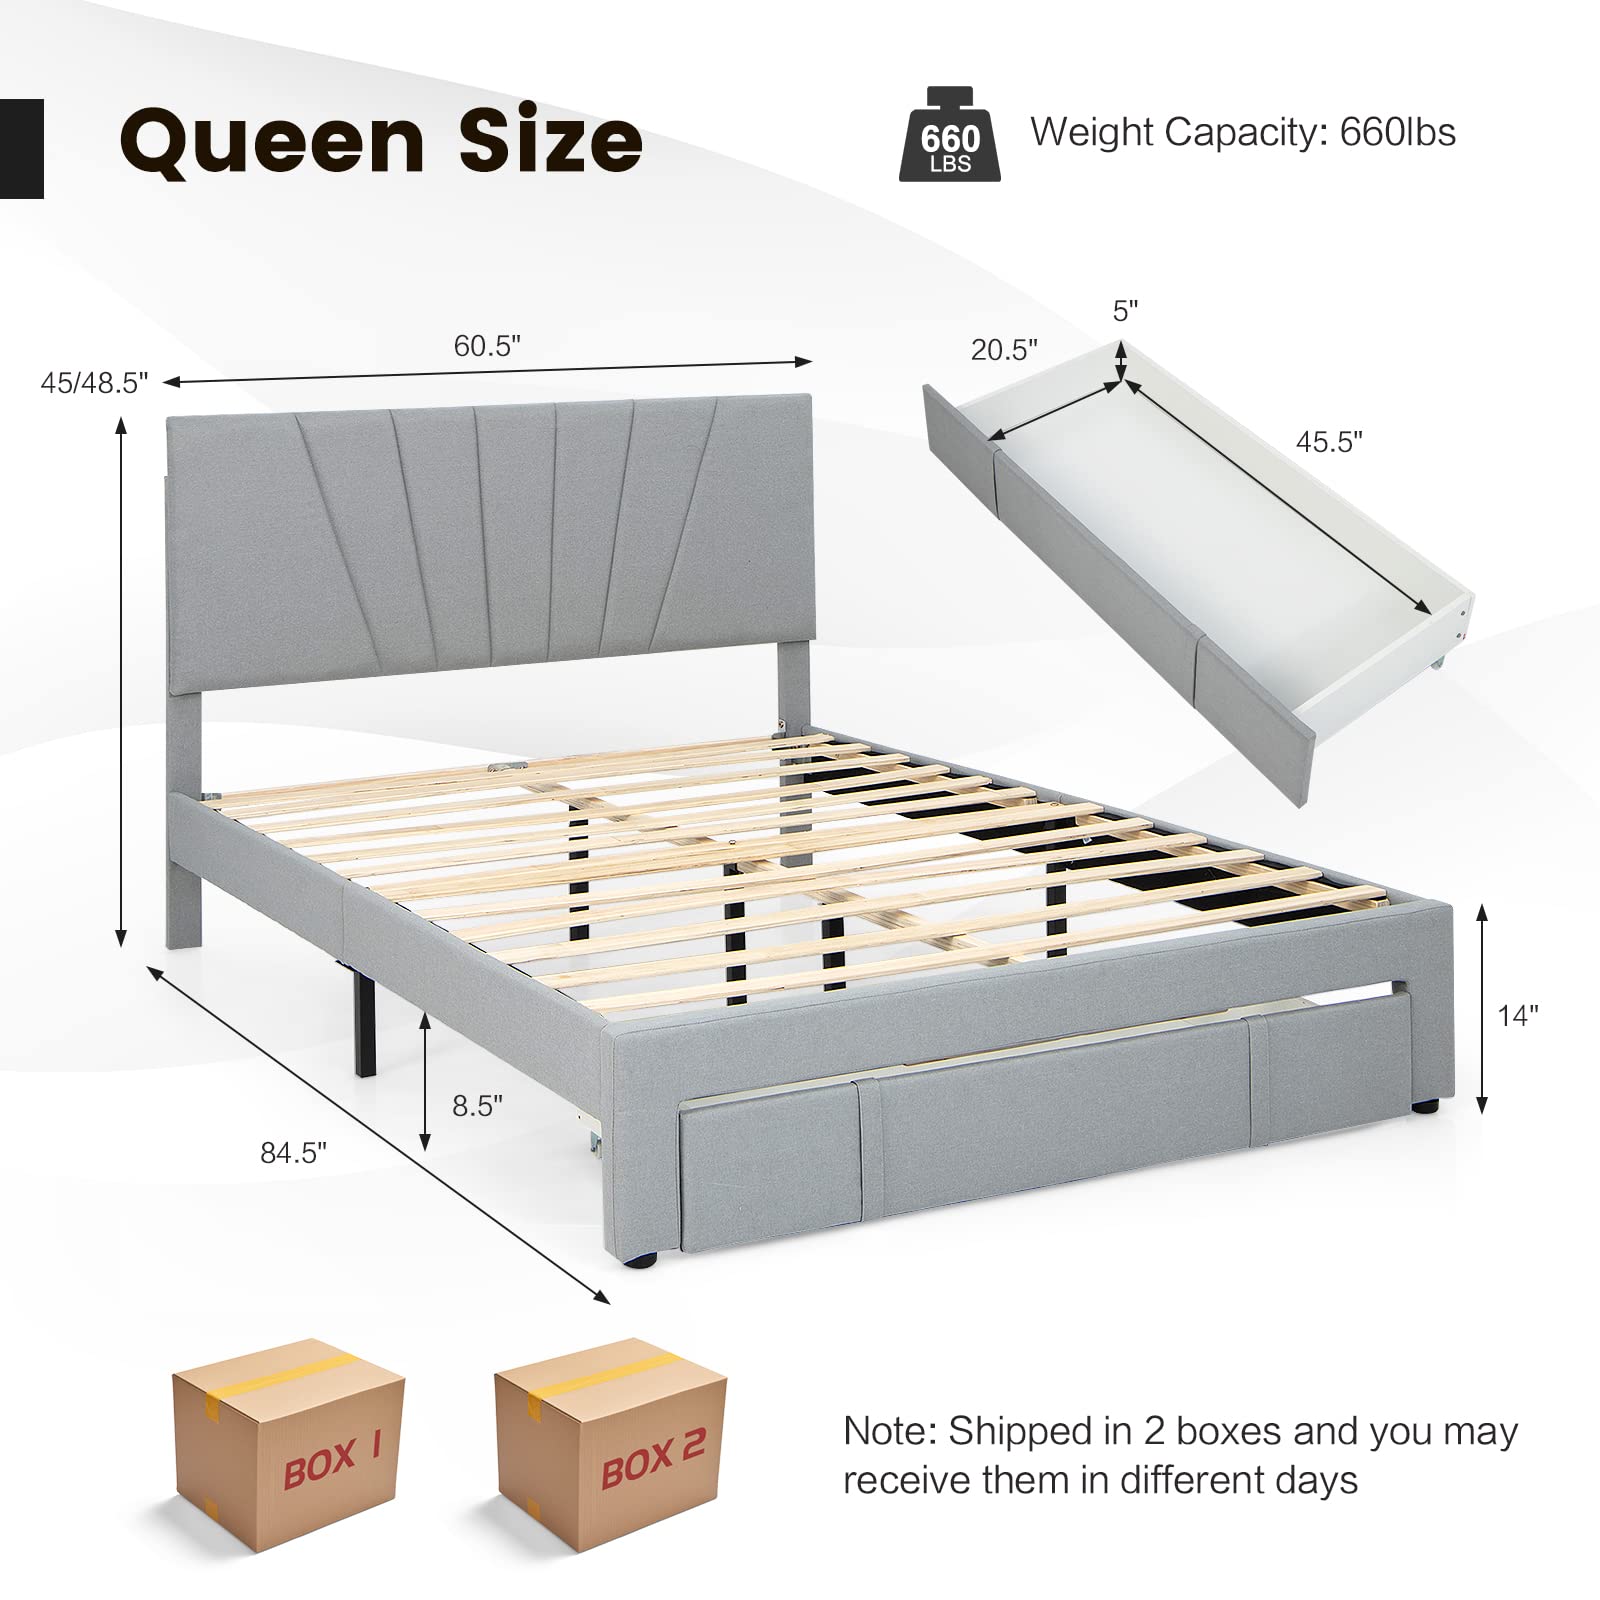 Giantex Upholstered Queen Bed Frame with Drawer, Modern Platform Bed with Storage & Adjustable Headboard